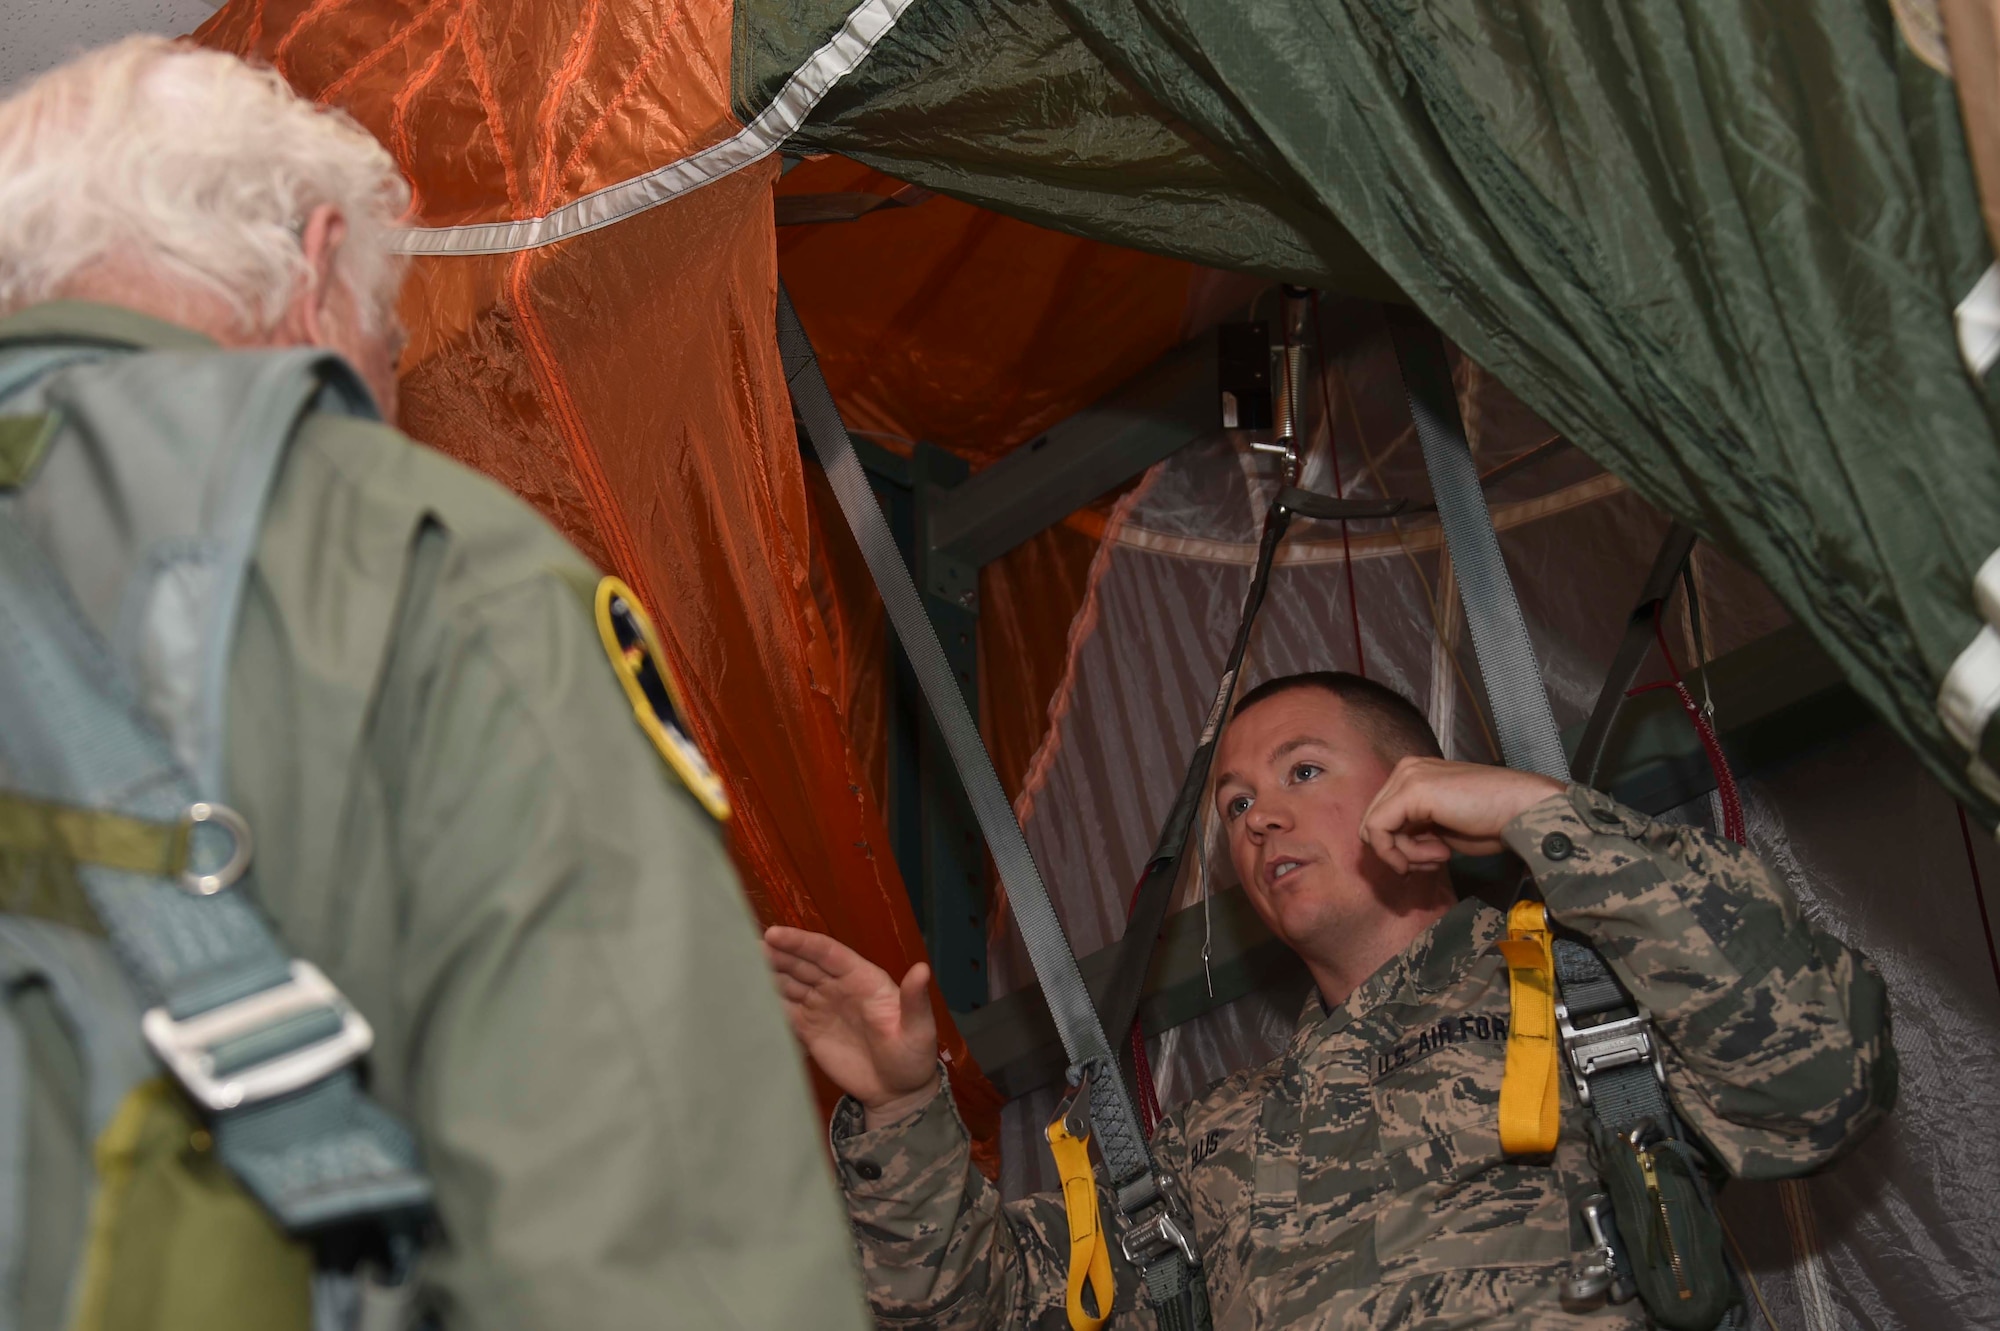 U.S. Air Force Tech. Sgt. Johnny Ellis, 144th Operations Group aicrew flight equipment technician, demonstrates proper parachute handling procedures to U.S. Air Force Brig. Gen. (ret.) Robert Earthquake Titus at the Fresno Air National Guard Base April 1, 2016. Titus is the 144th Fighter Wing's 3rd Annual Heritage Week honored guest, who shared his personal experiences as a fighter pilot with the 144th FW Airmen. (U.S. Air National Guard photo by Senior Airman Klynne Pearl Serrano)